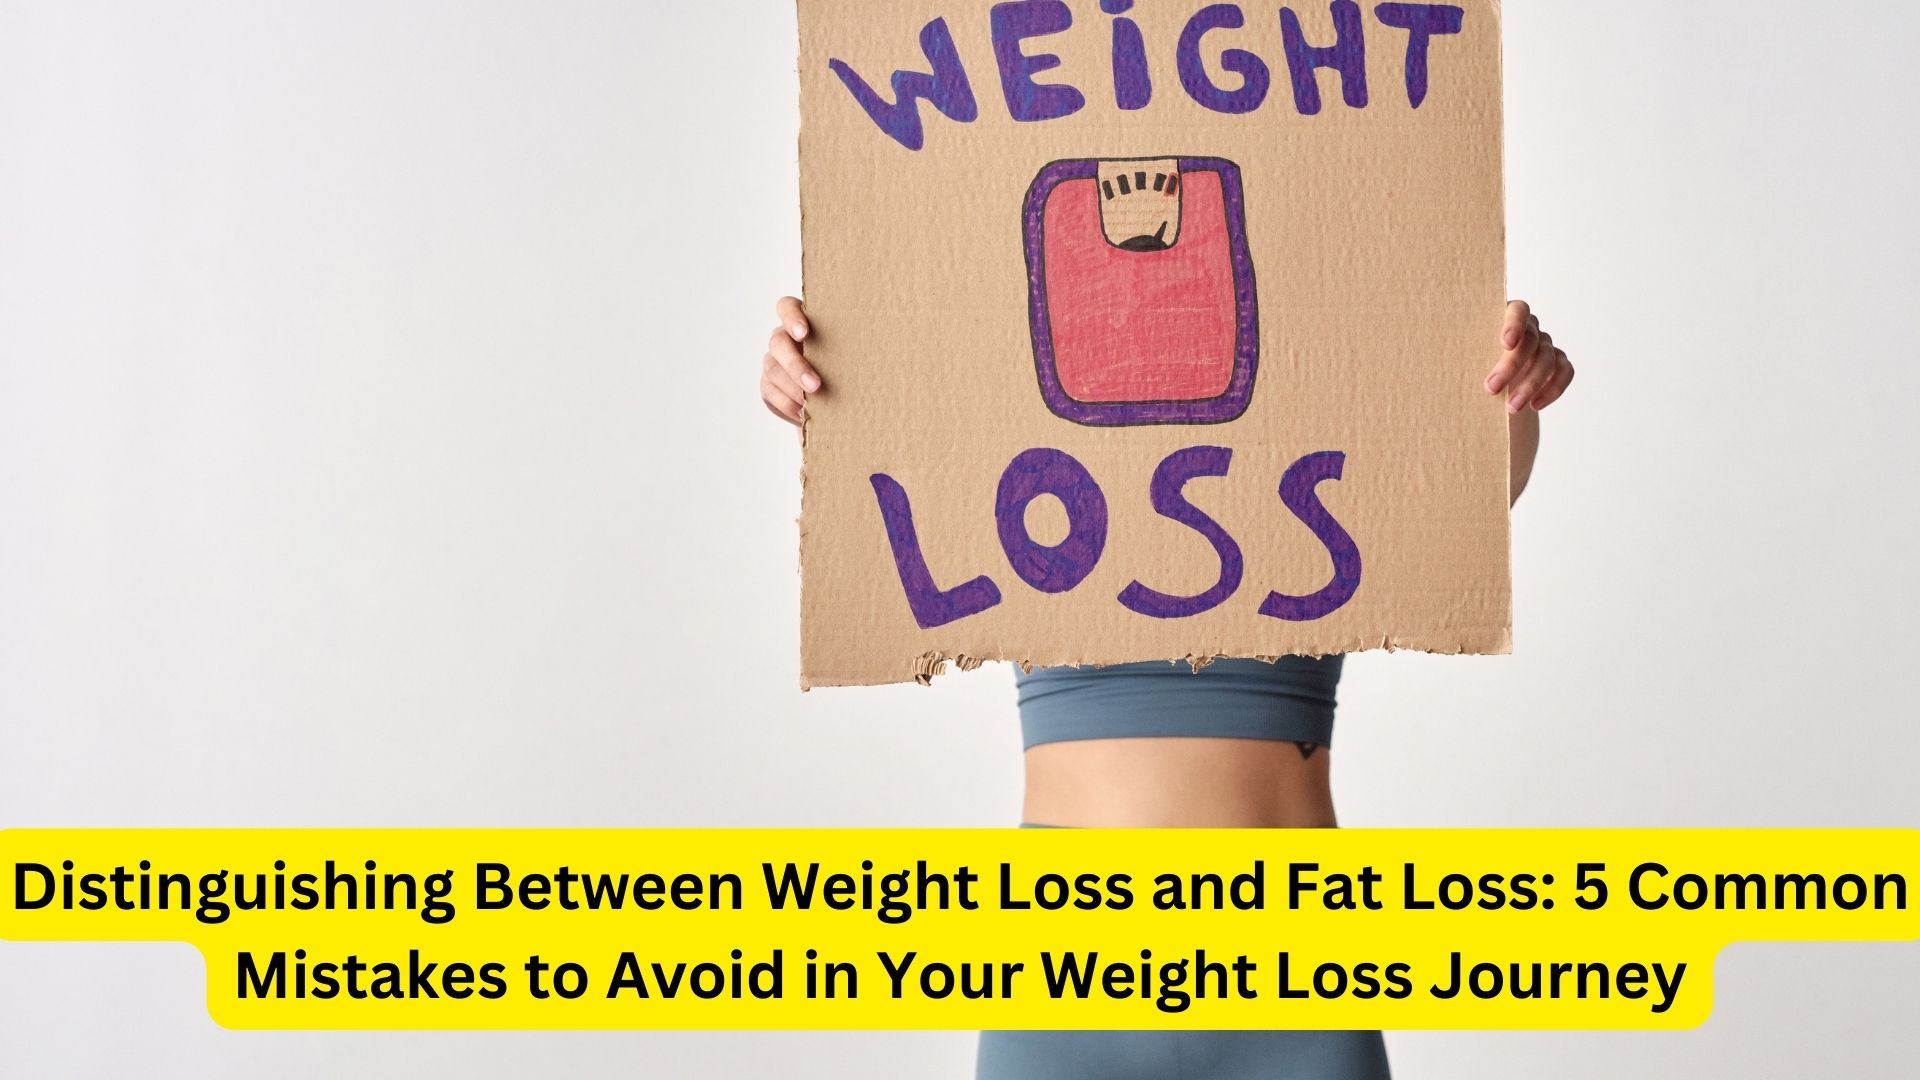 Distinguishing Between Weight Loss and Fat Loss: 5 Common Mistakes to Avoid in Your Weight Loss Journey